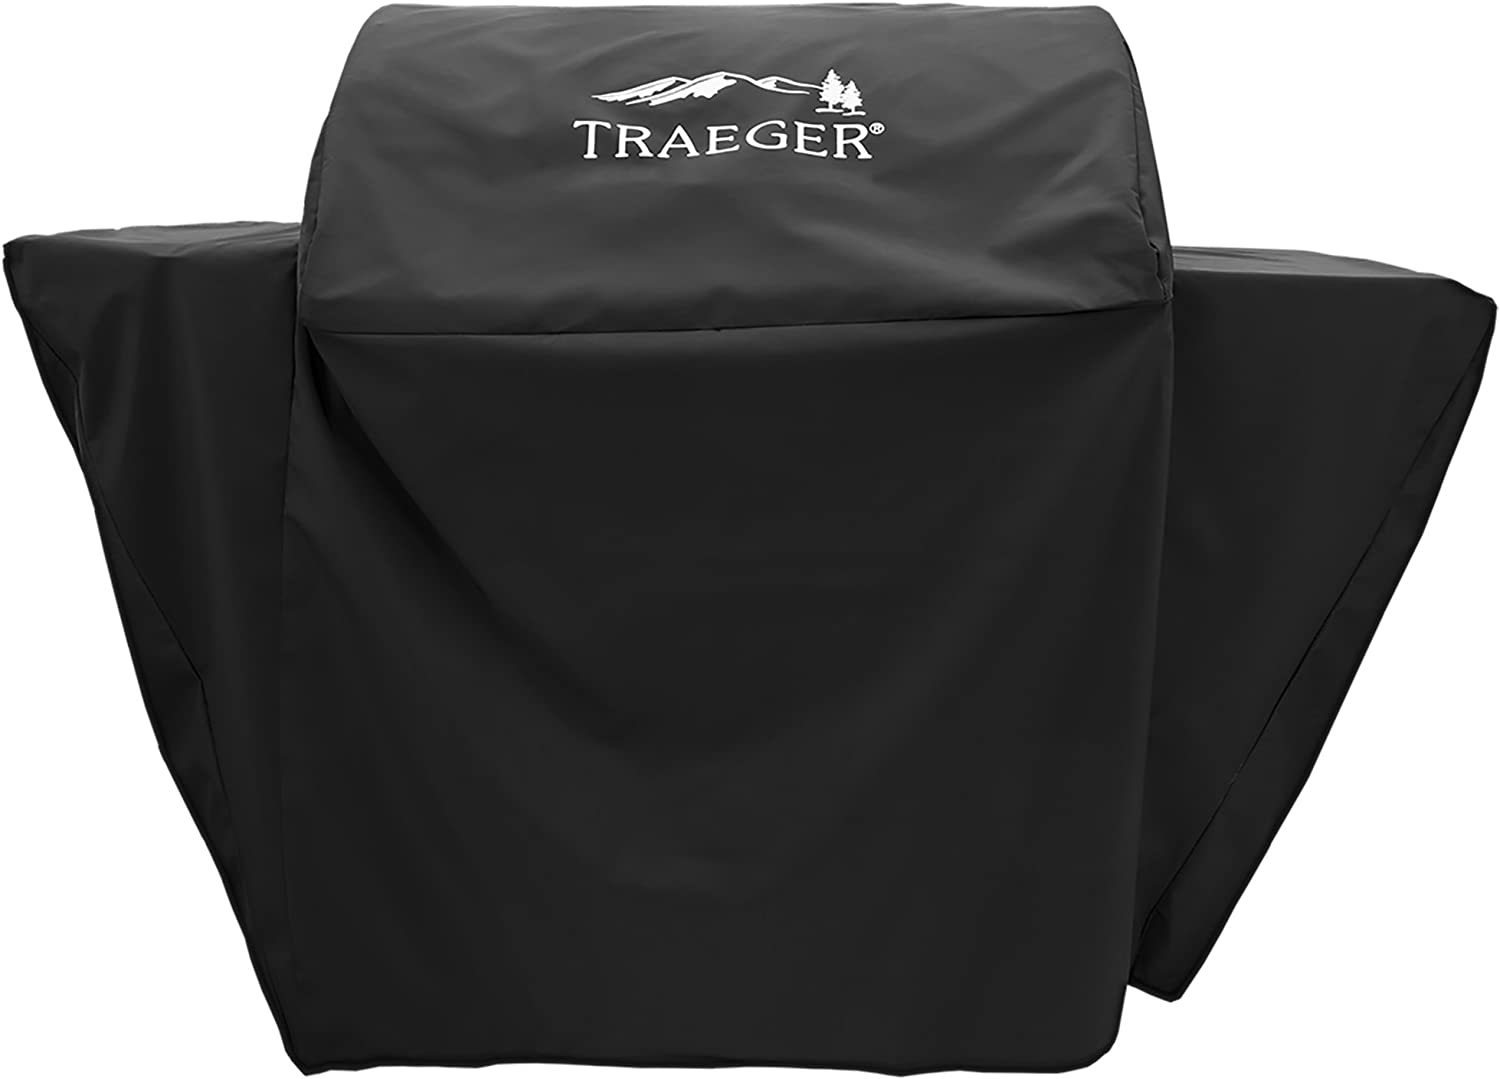 Traeger Full-Length Grill Cover - Select - $90.99